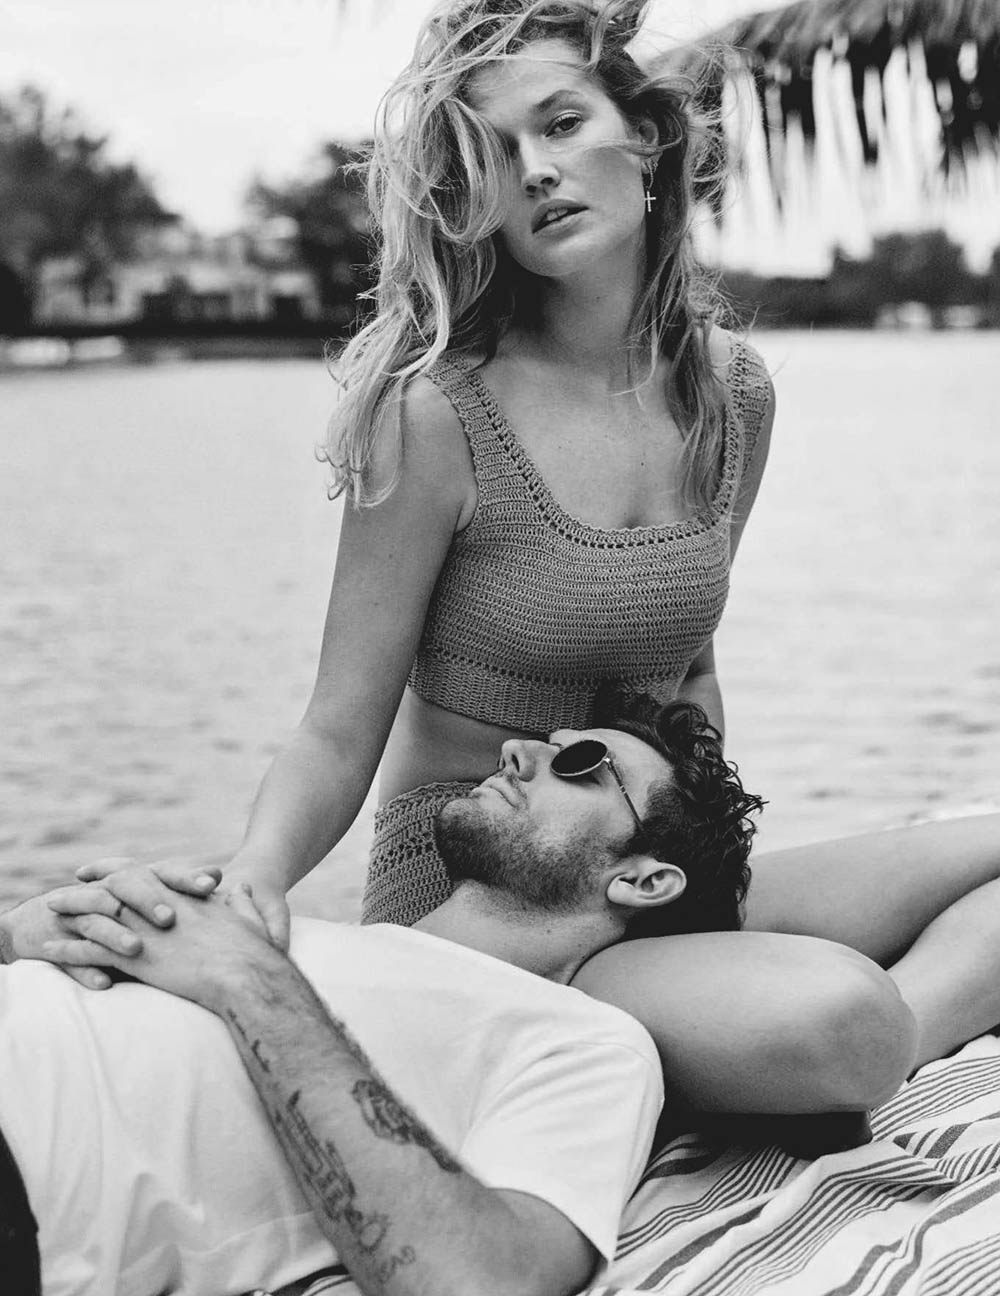 Toni Garrn and Alex Pettyfer cover Vogue Germany June 2020 by Giampaolo Sgura